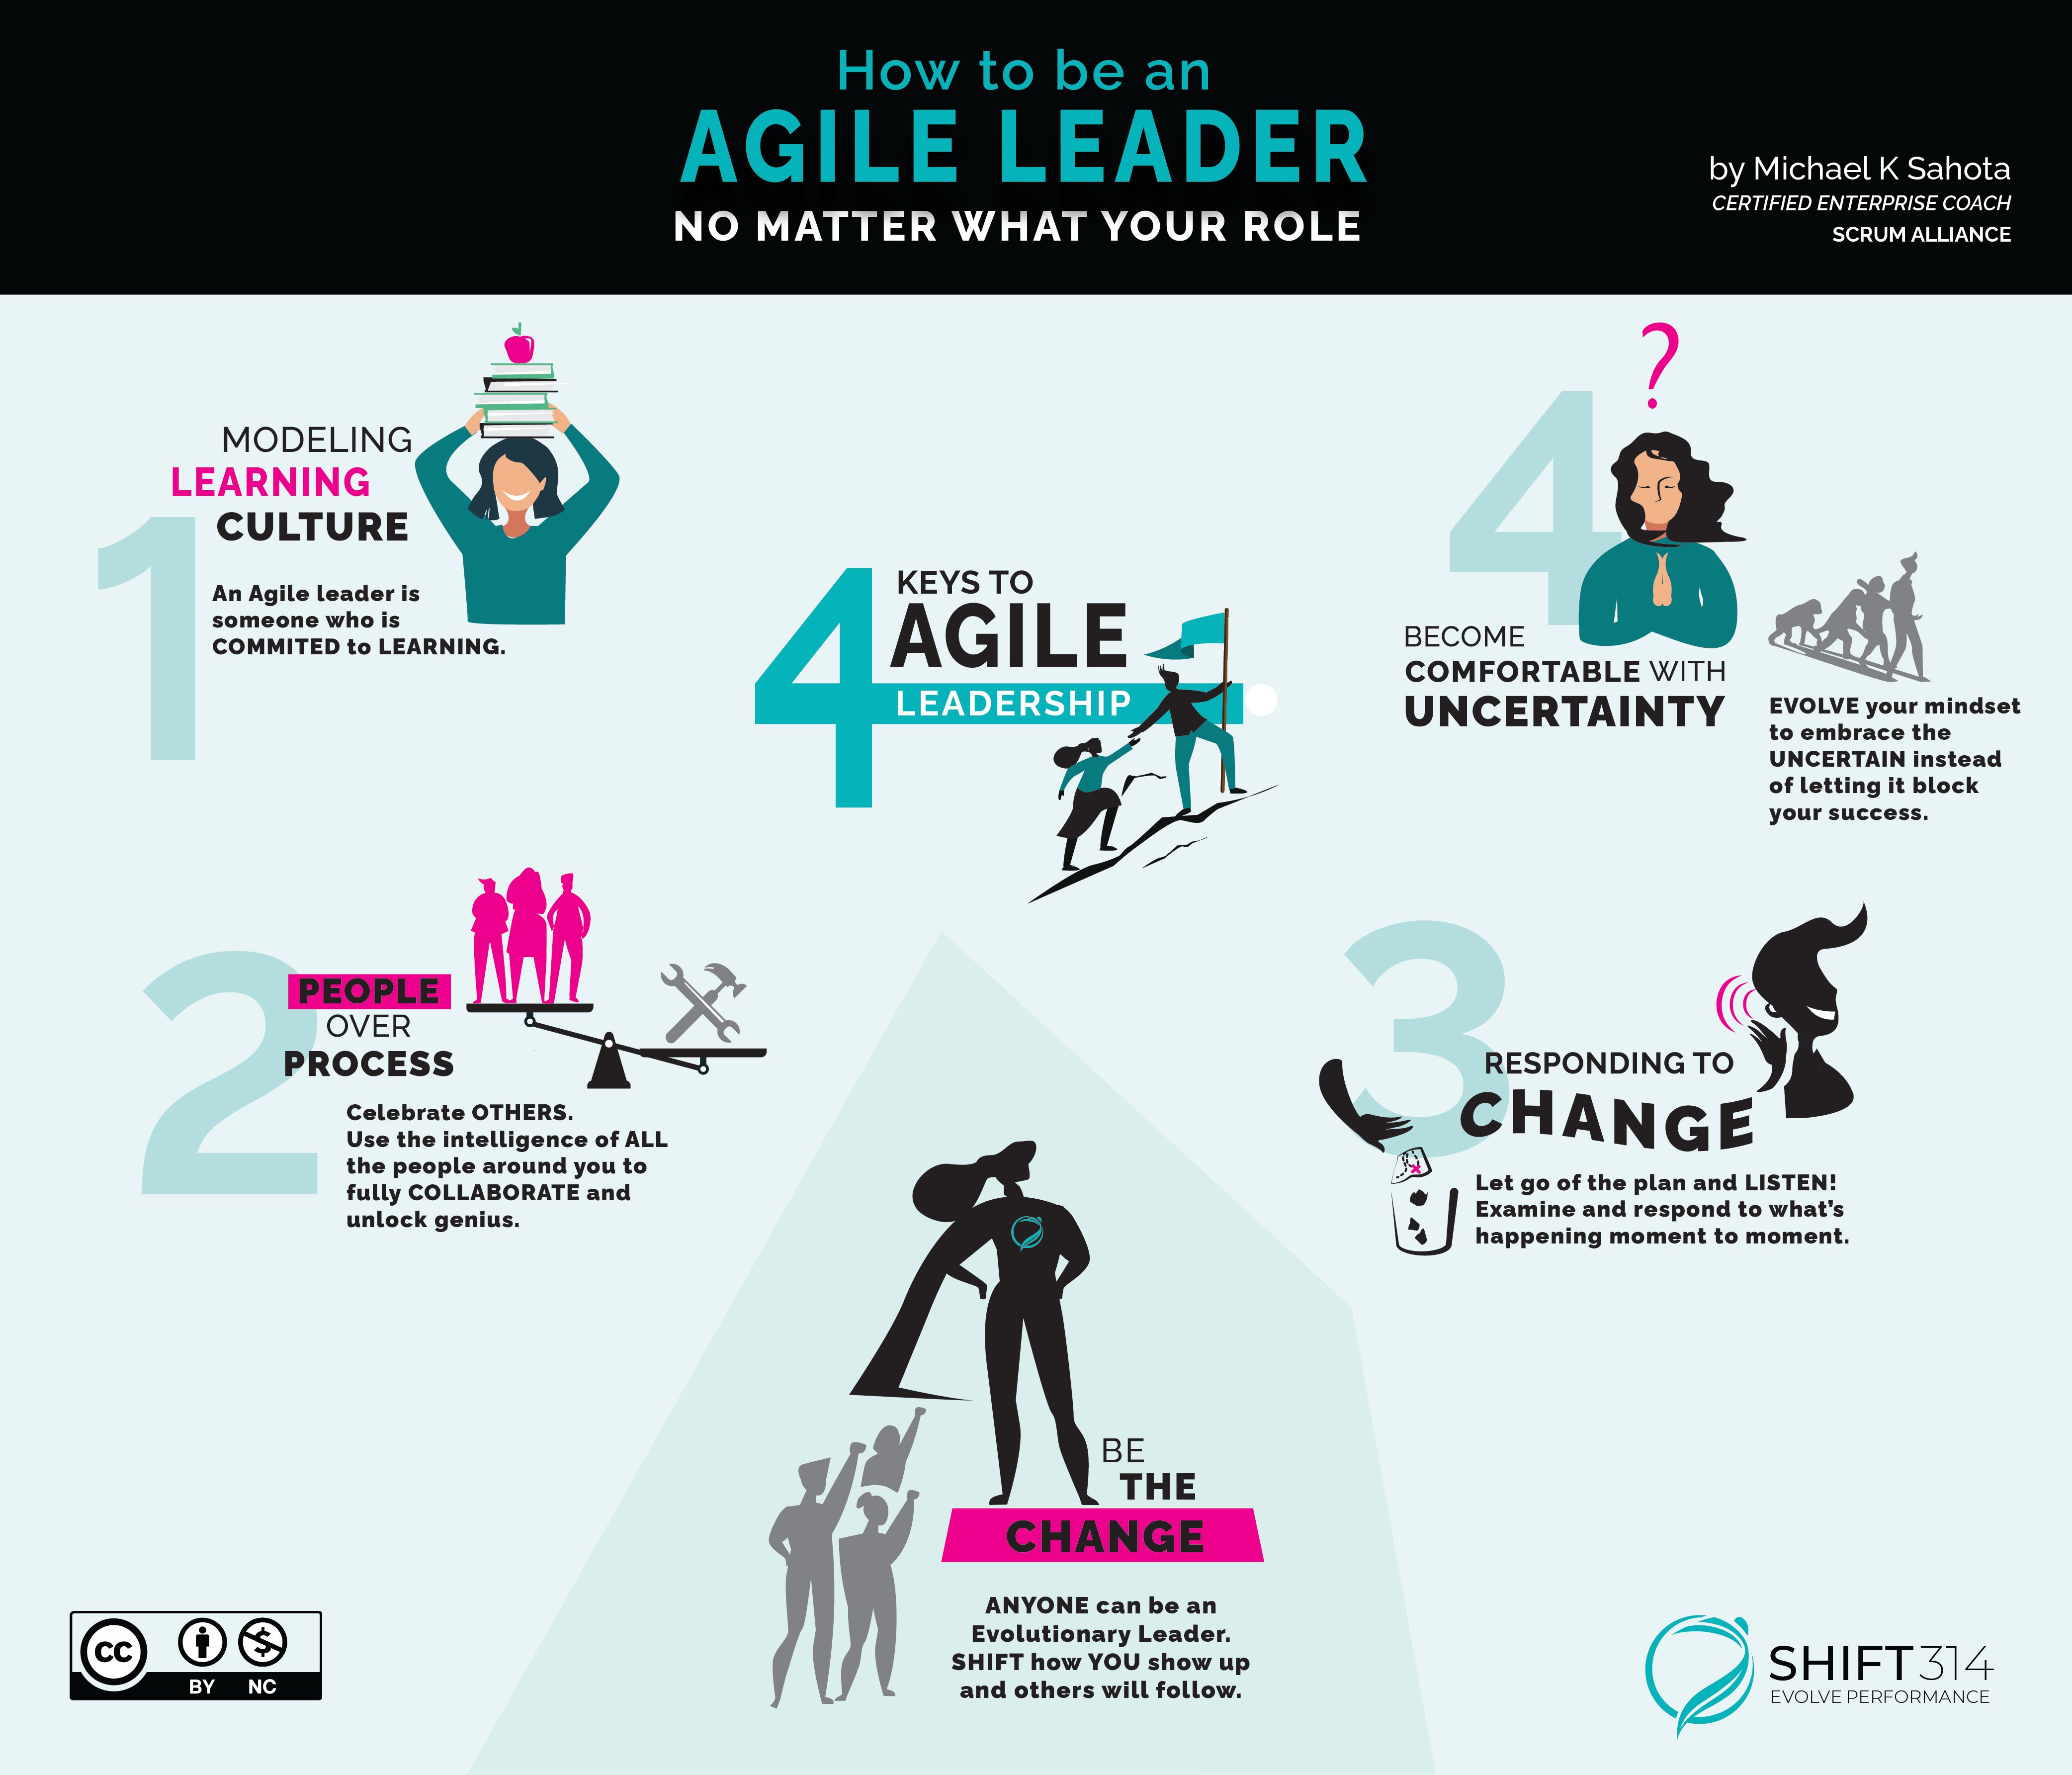 What Does it Mean to Be an Agile Leader?